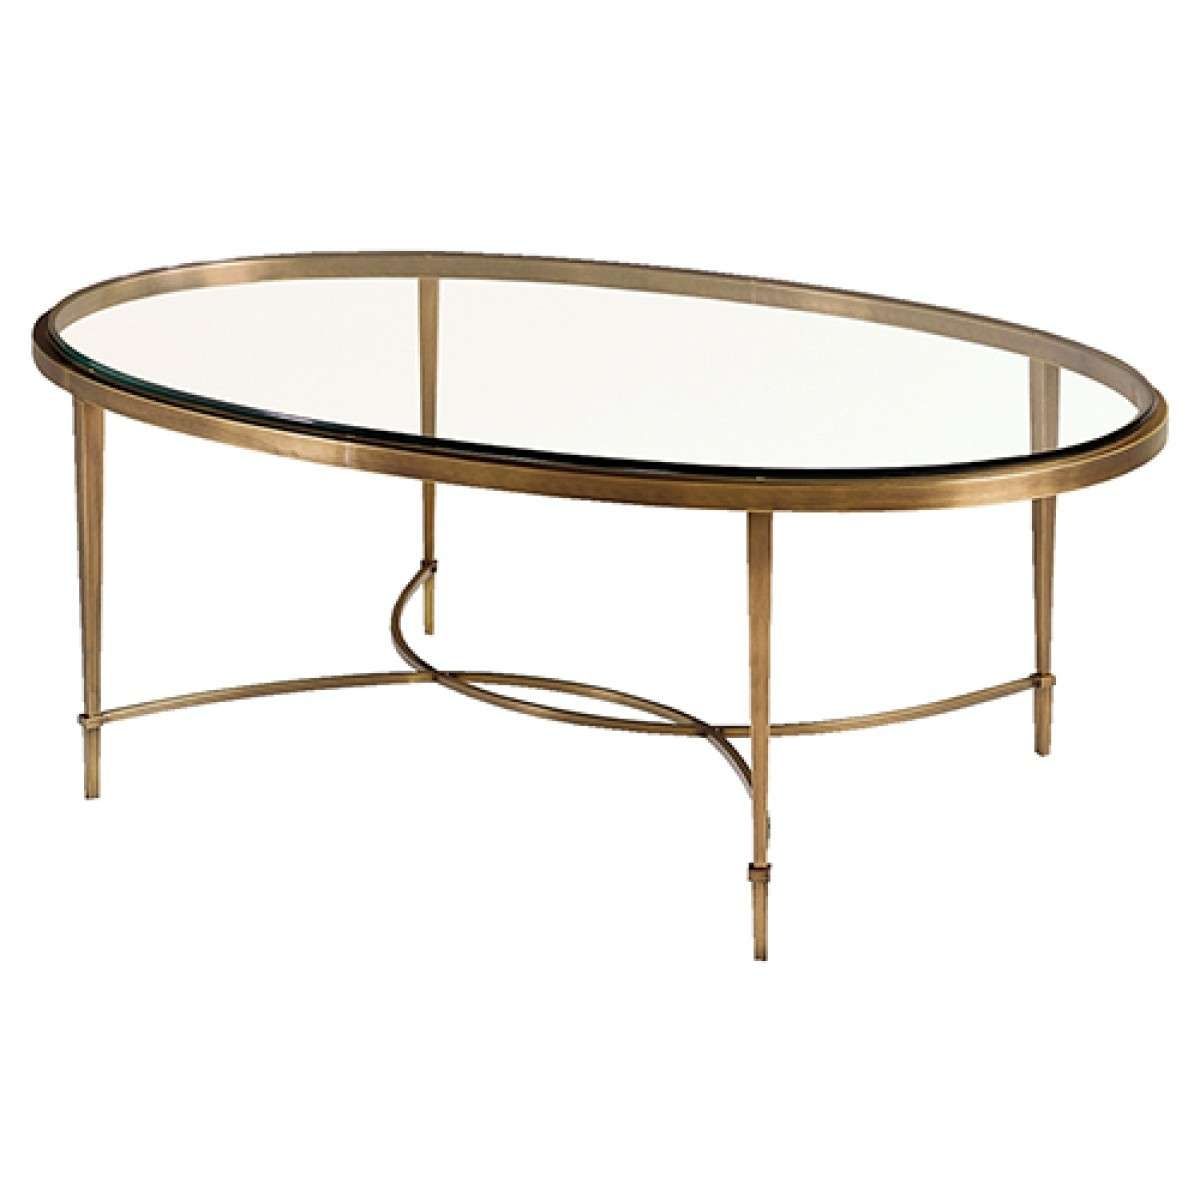 Most Popular Vintage Glass Coffee Tables Intended For Coffee Tables : Furniture Vintage Glass Top Coffee Table With (Gallery 7 of 20)